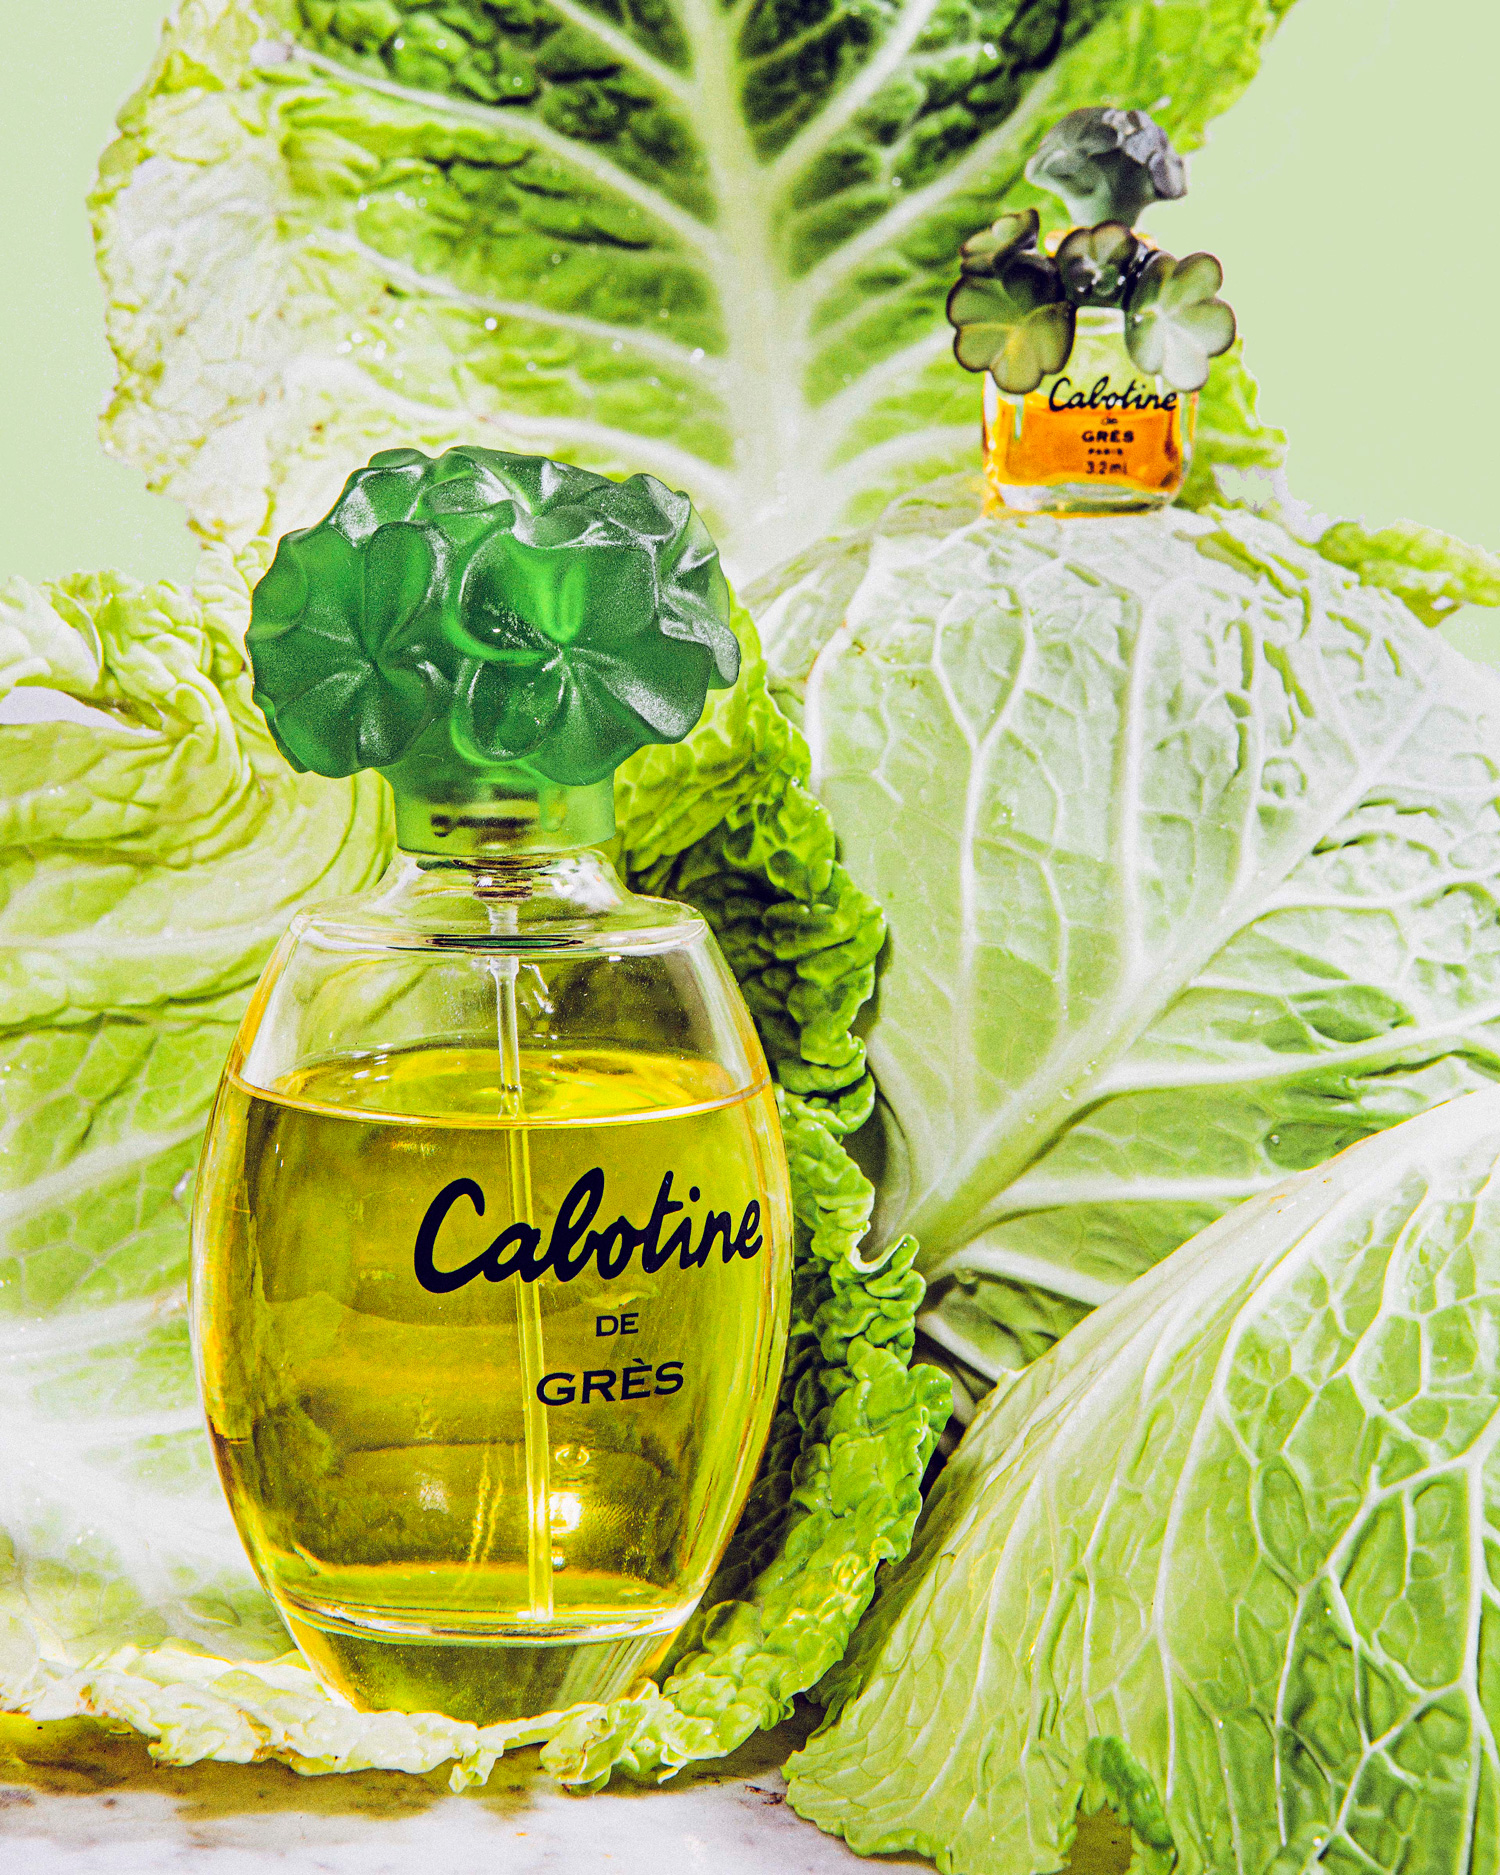 Cabotine Perfume by Parfums Gres